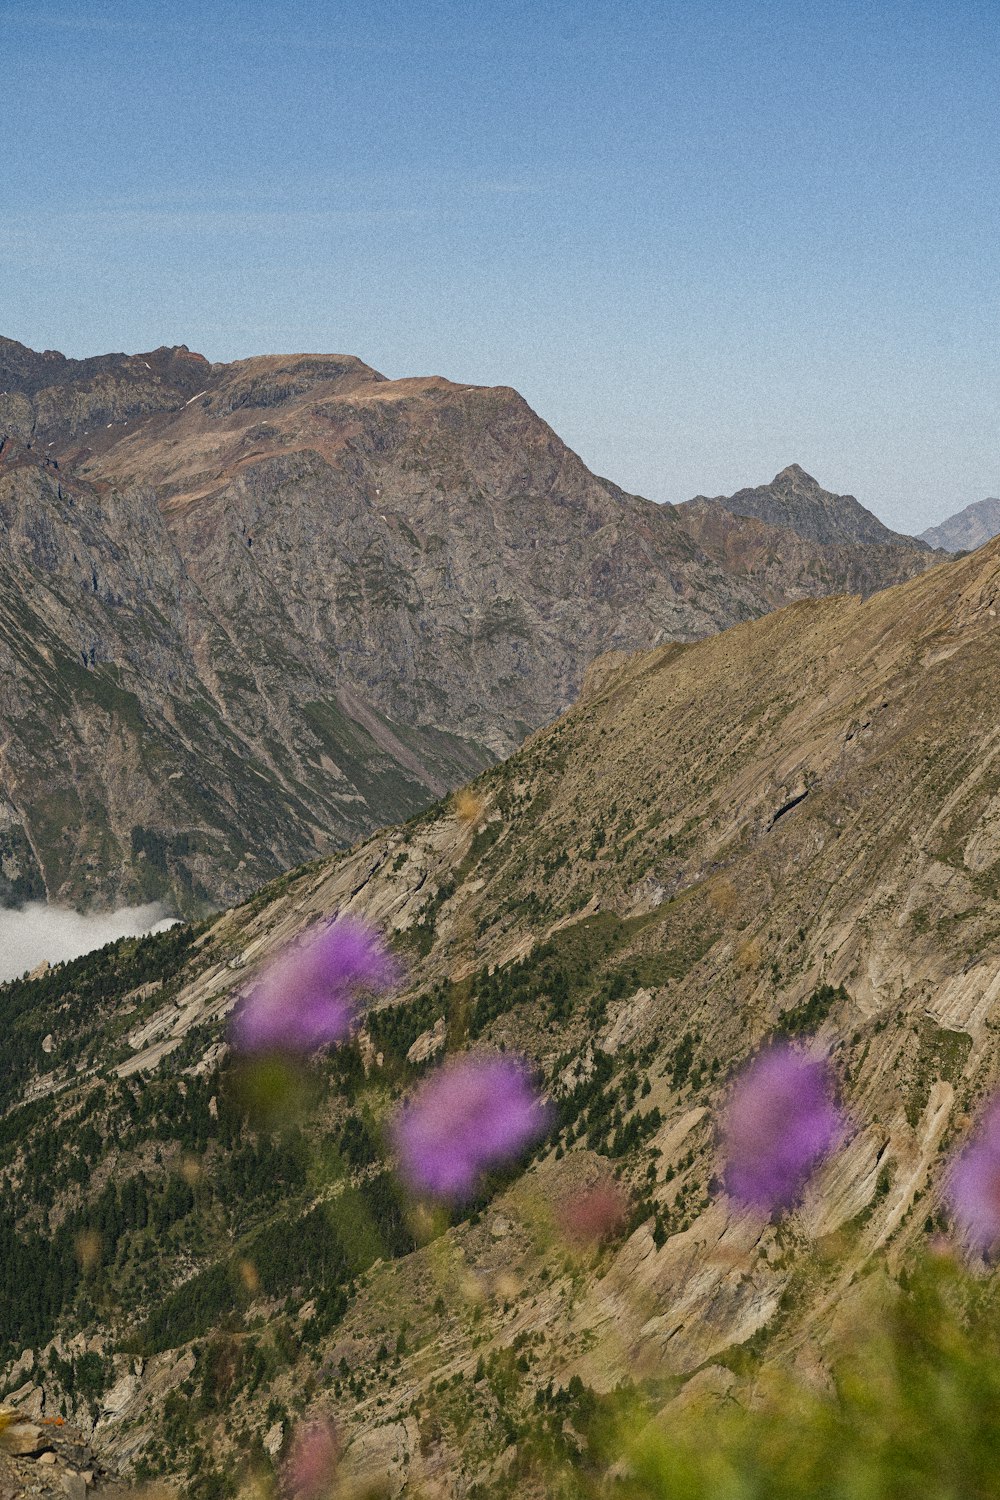 purple flowers in the foreground with mountains in the background